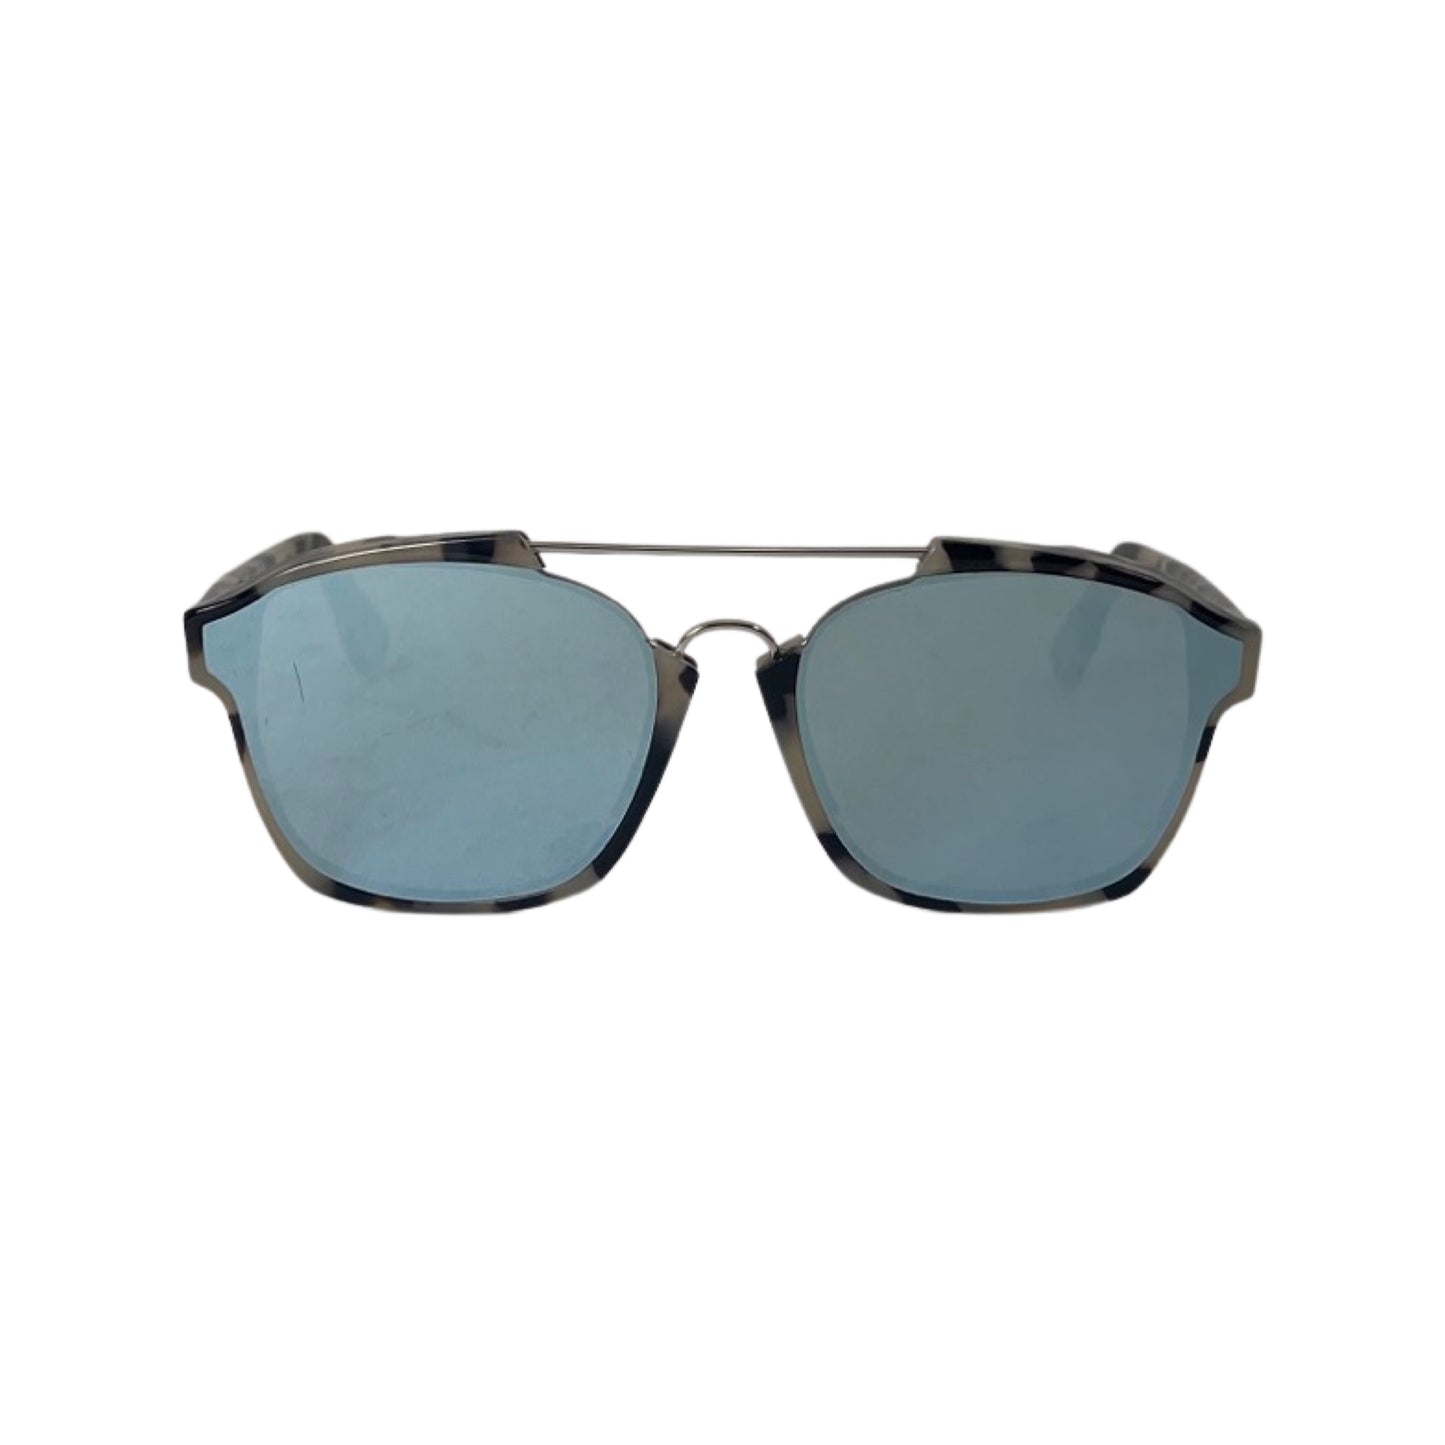 Christian Dior Abstract Mirrored Sunglasses